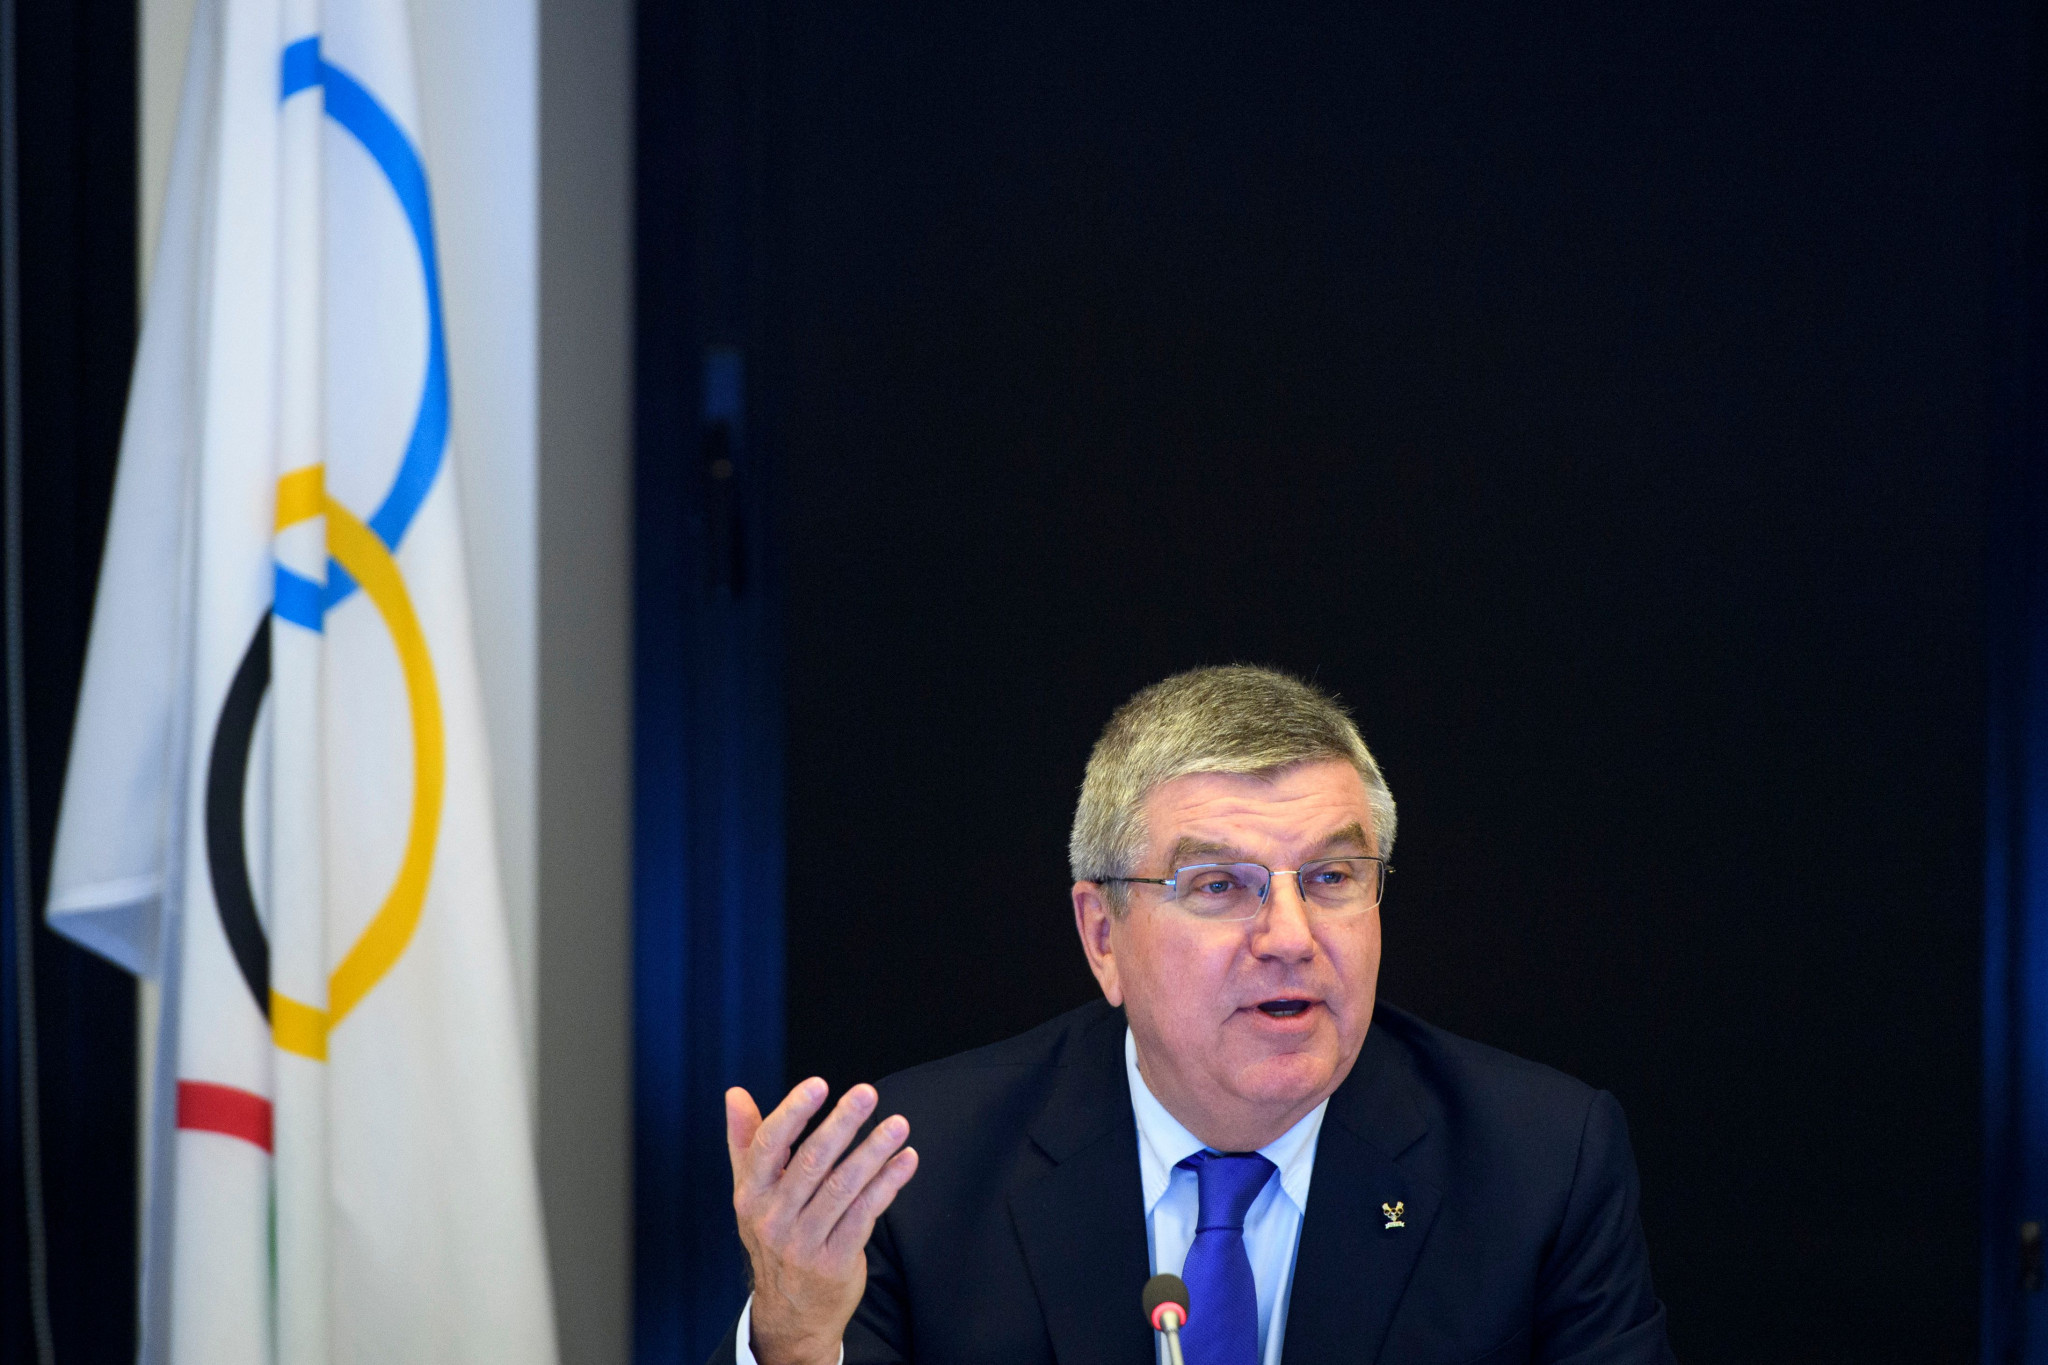 President Thomas Bach will chair the IOC Executive Board meeting starting tomorrow ©Getty Images